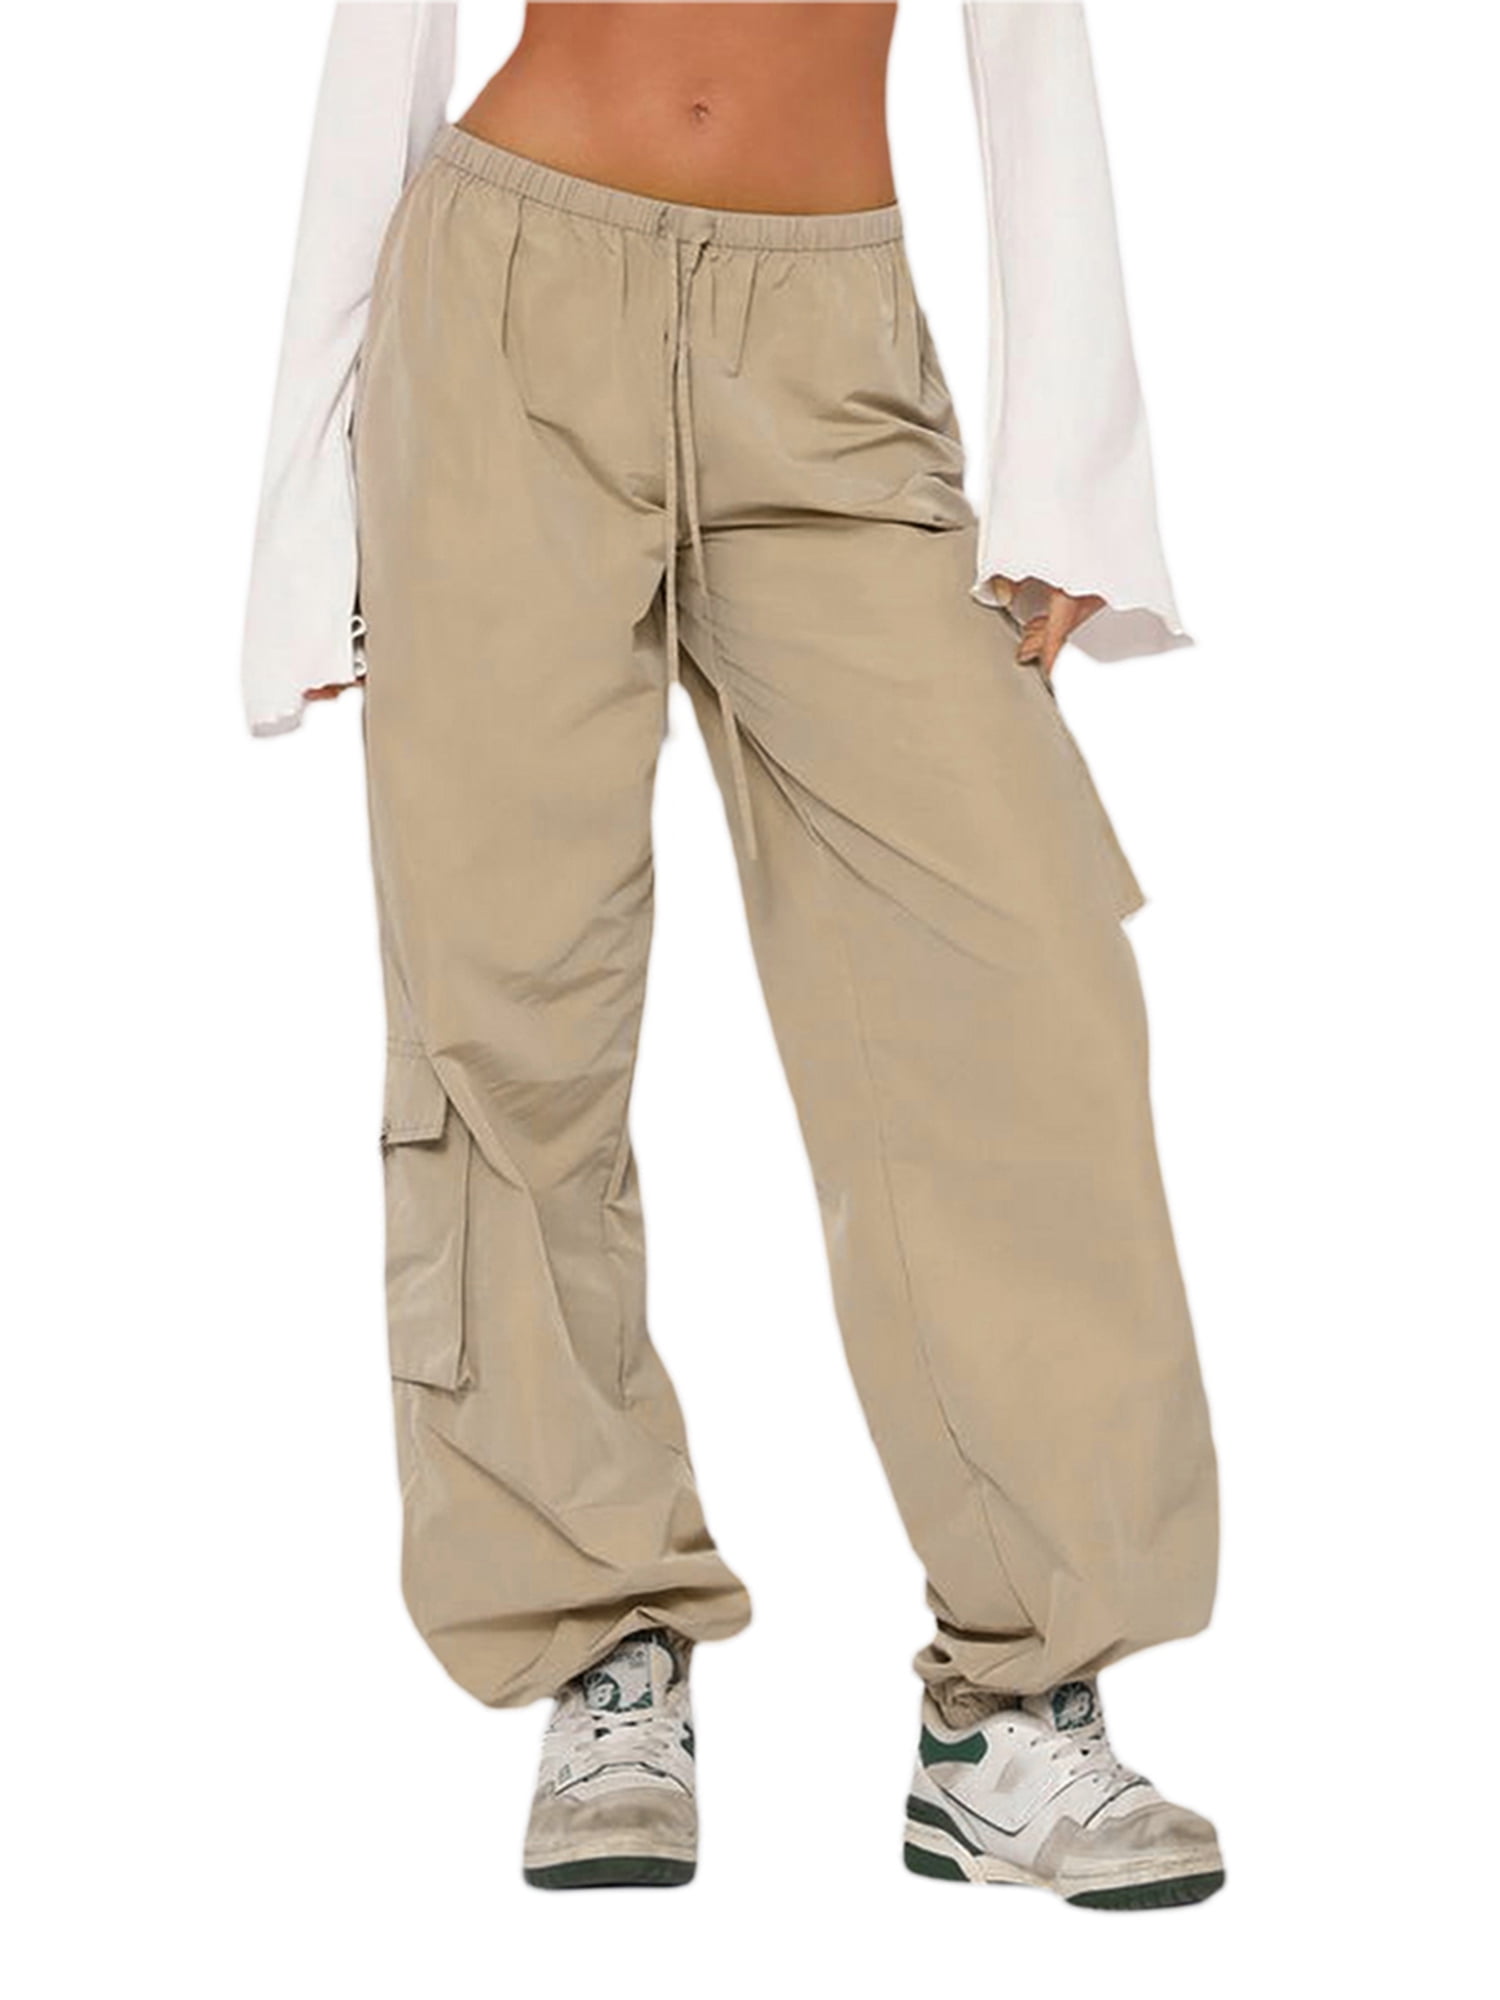 Buy BLACK STRAIGHT LOOSE CARGO PANTS for Women Online in India